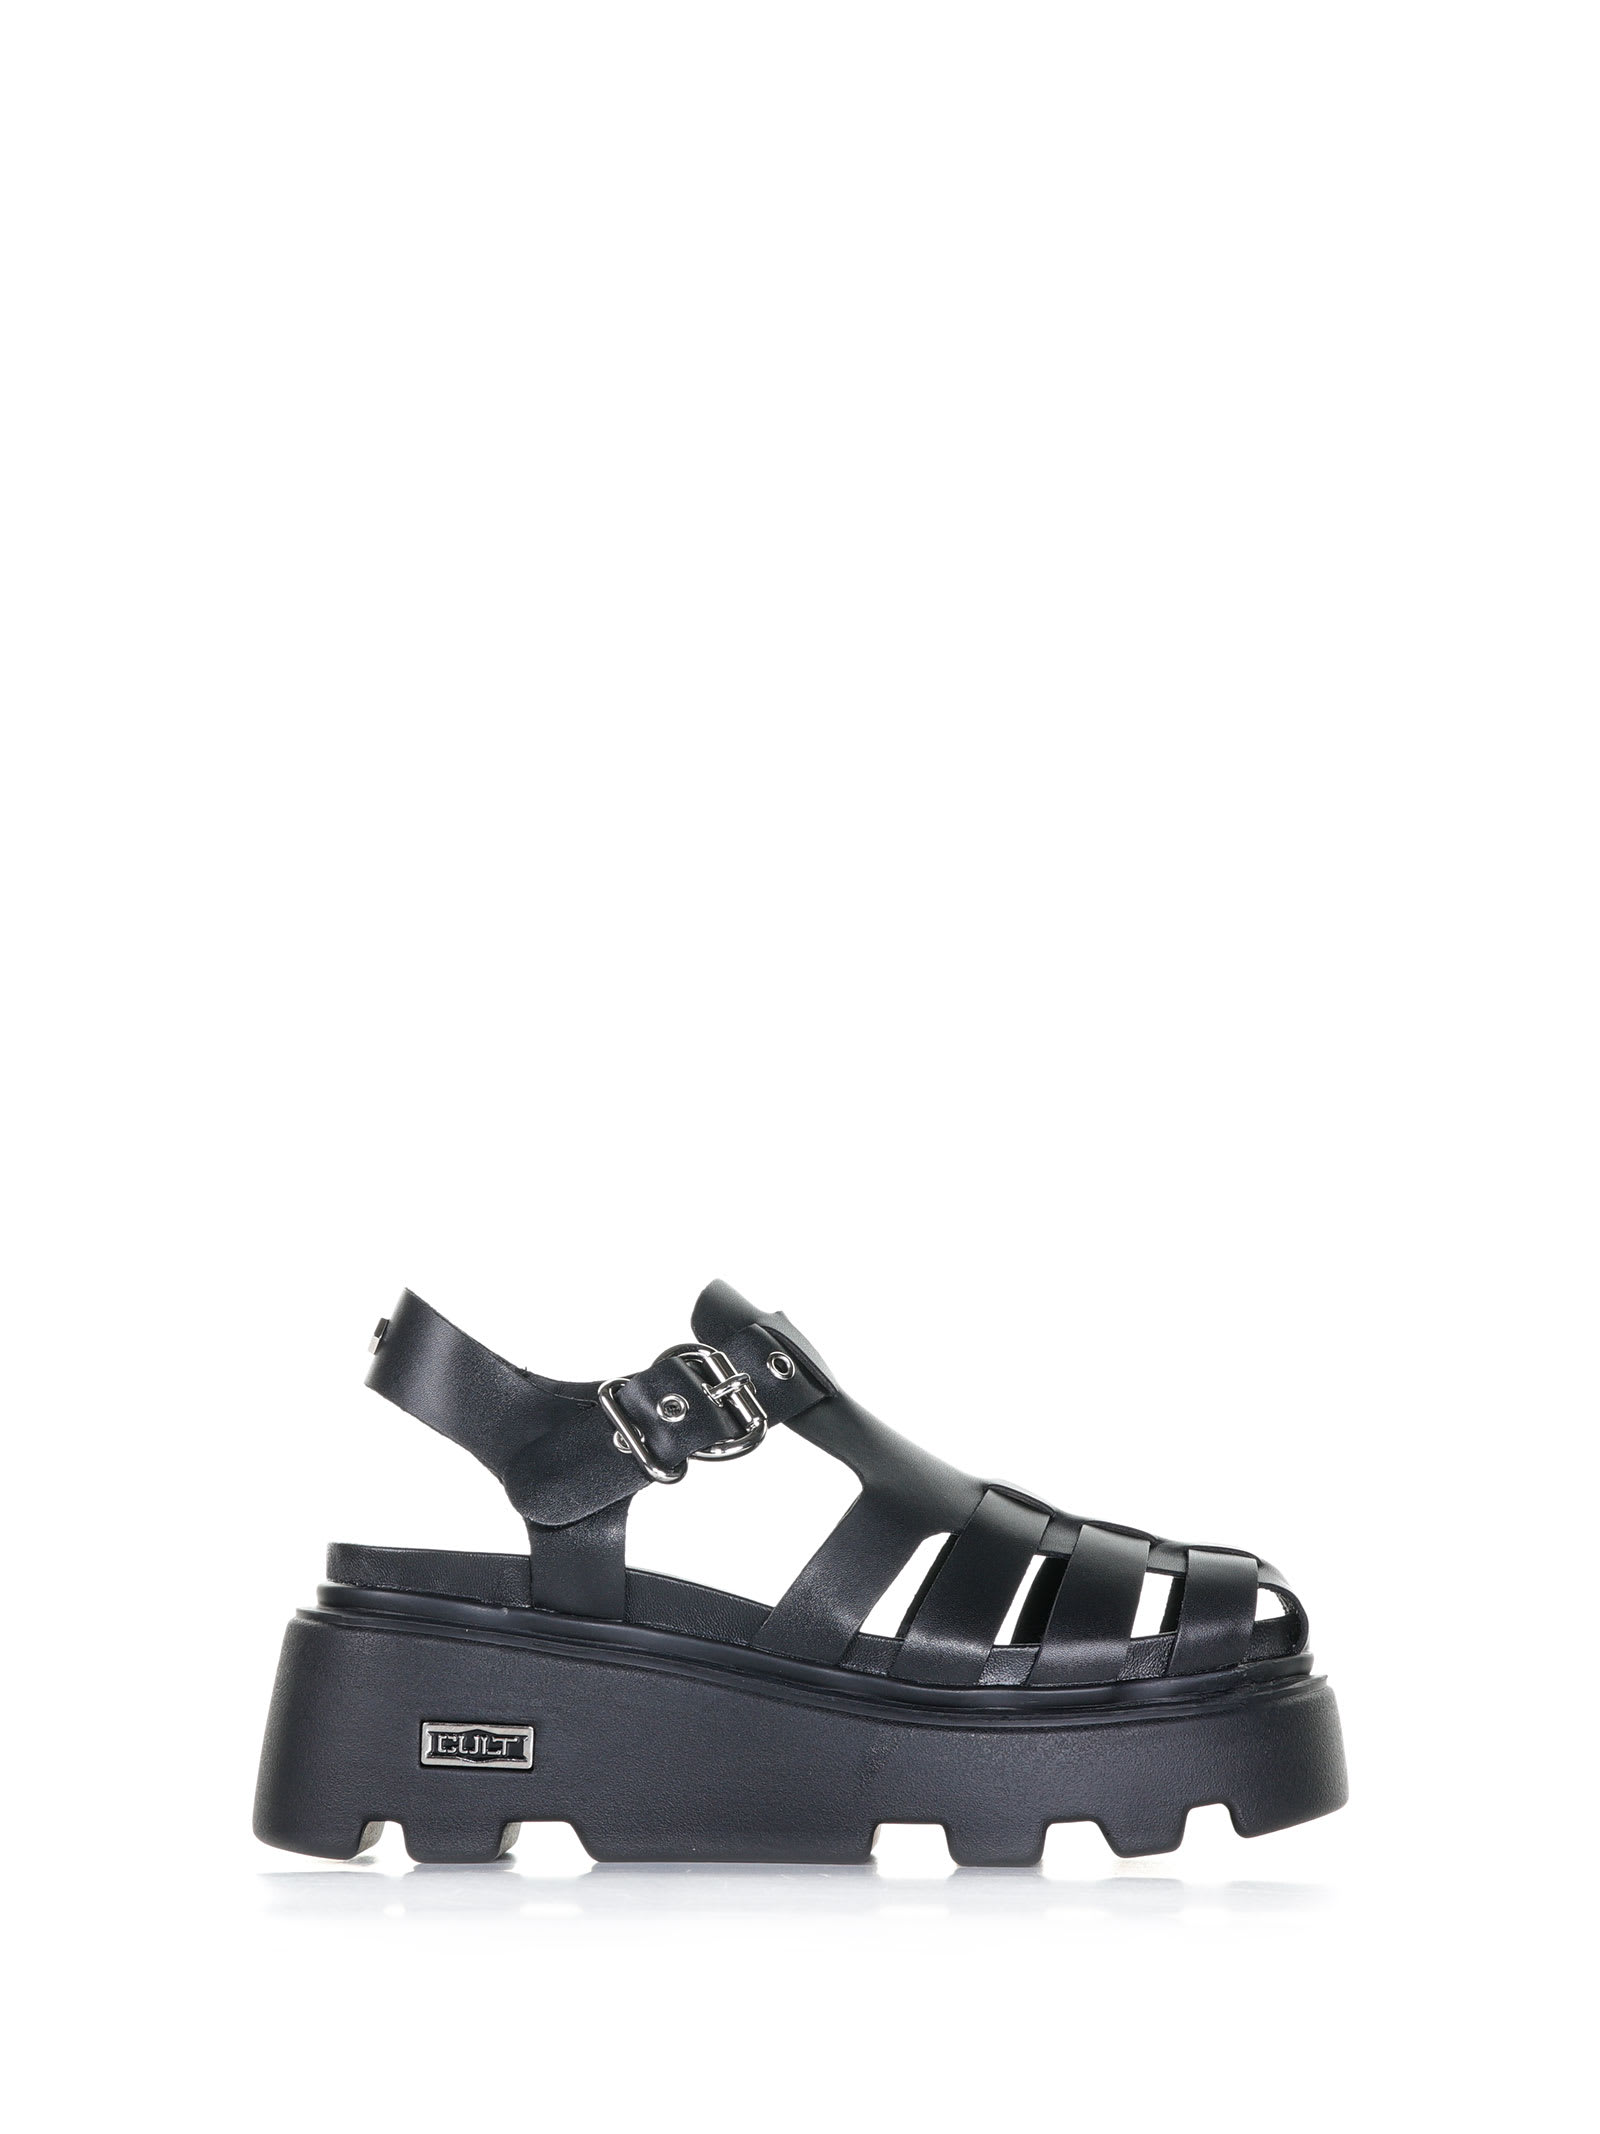 Cult New Rock 3657 Leather Sandals